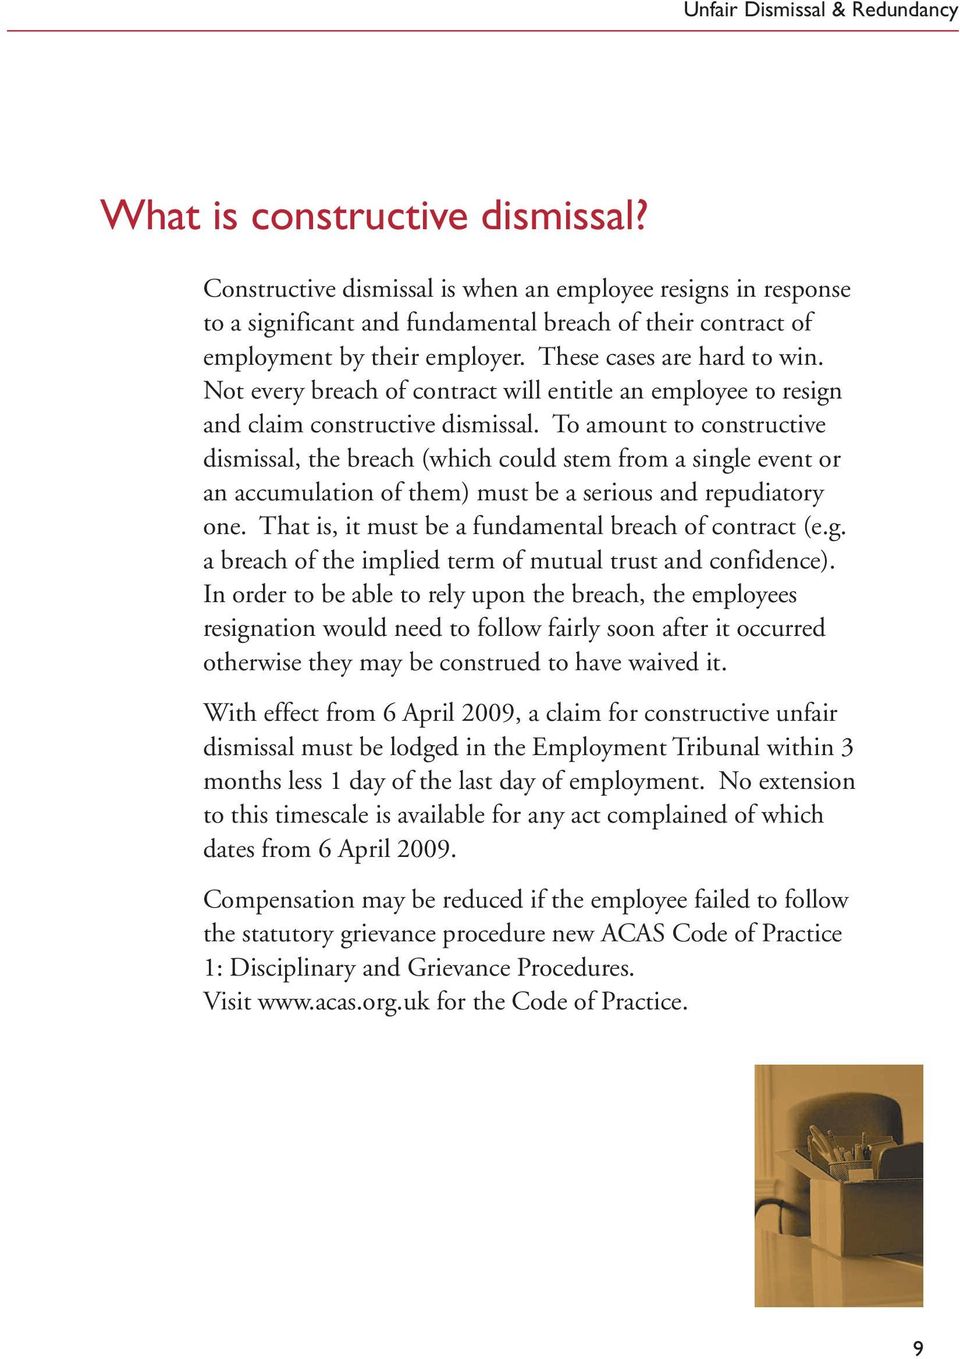 To amount to constructive dismissal, the breach (which could stem from a single event or an accumulation of them) must be a serious and repudiatory one.